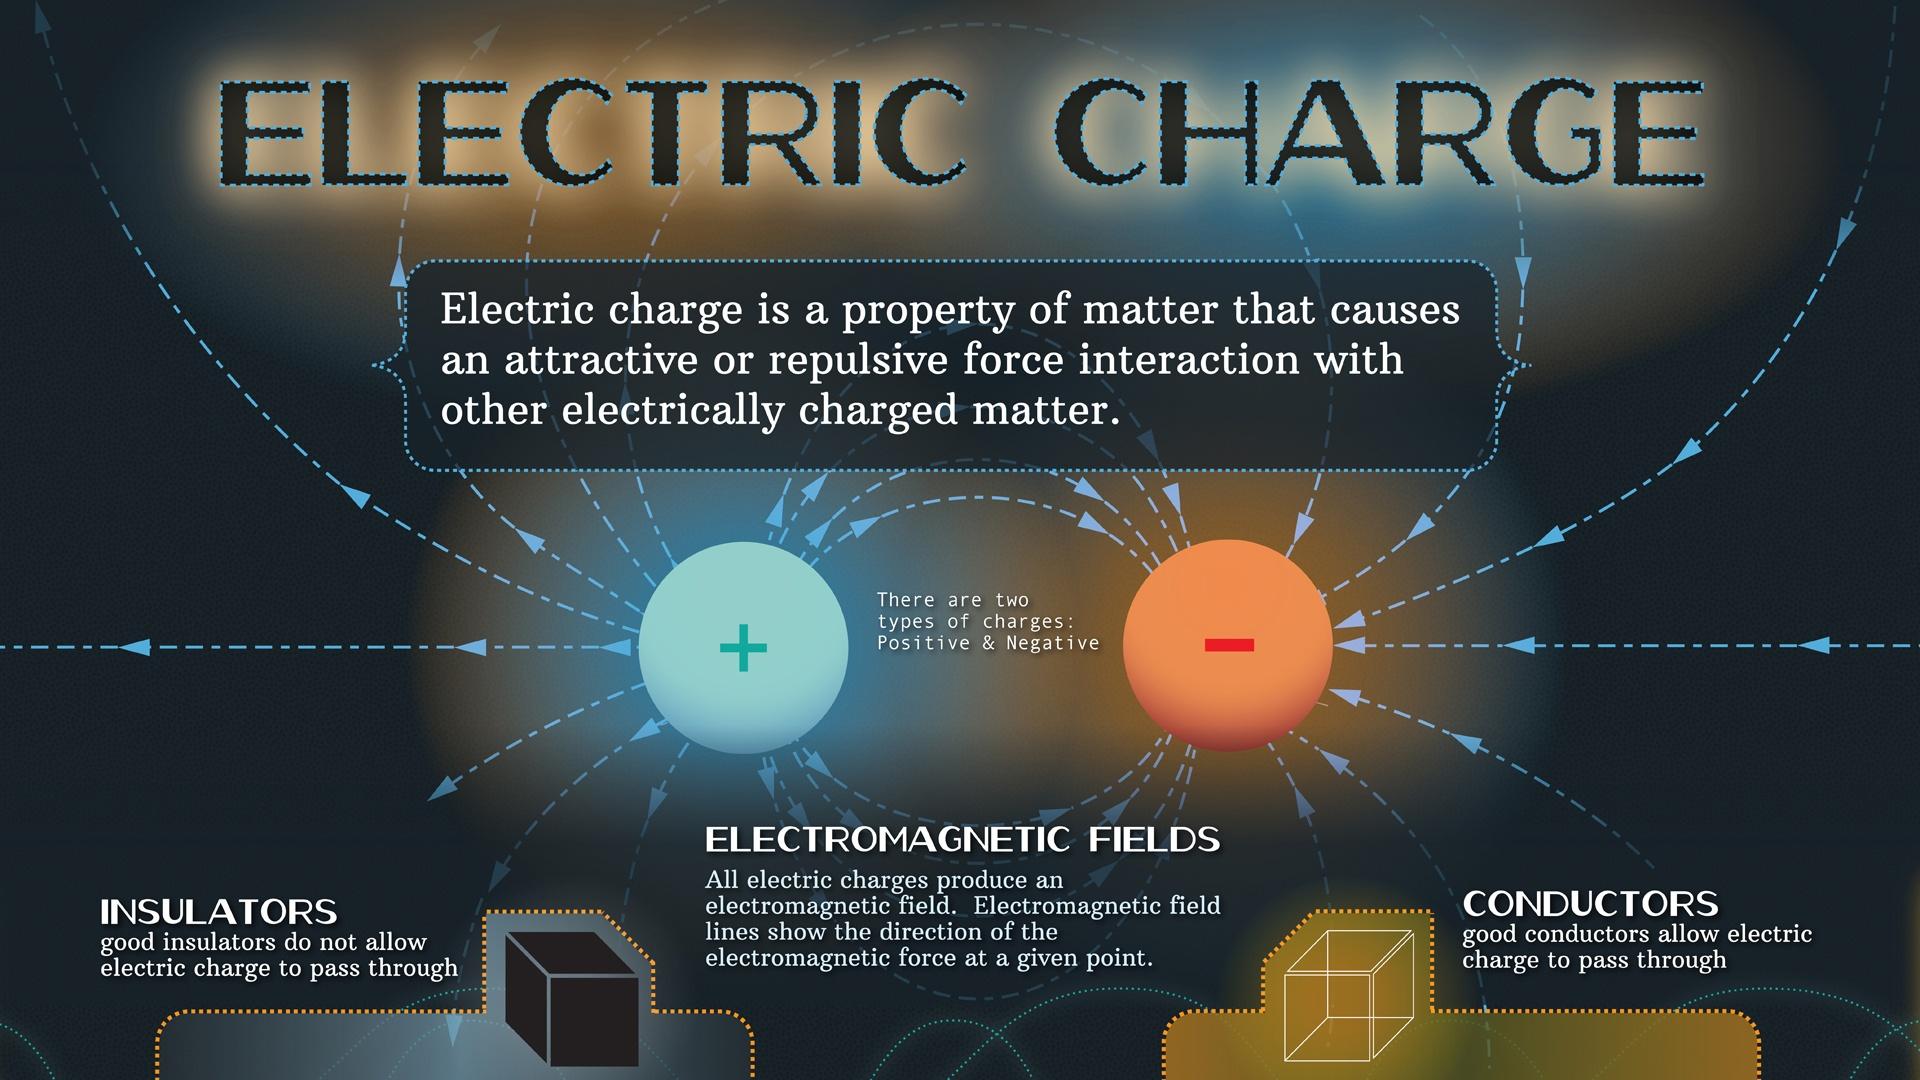 electric-charge-infographic-pbs-learningmedia